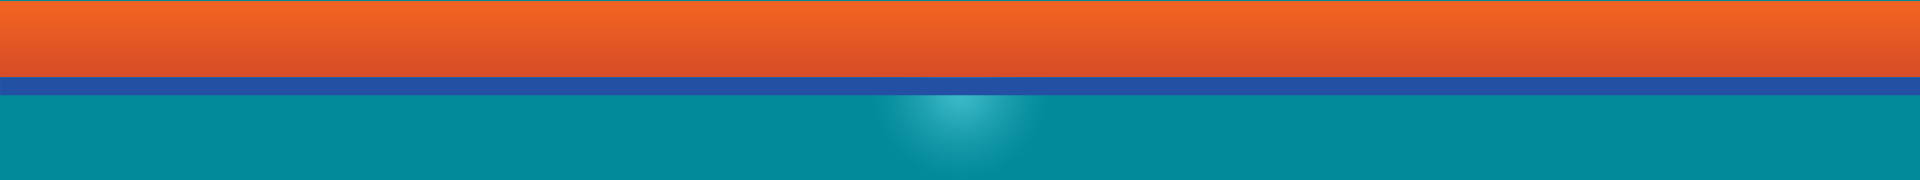 turquoise and orange footer border